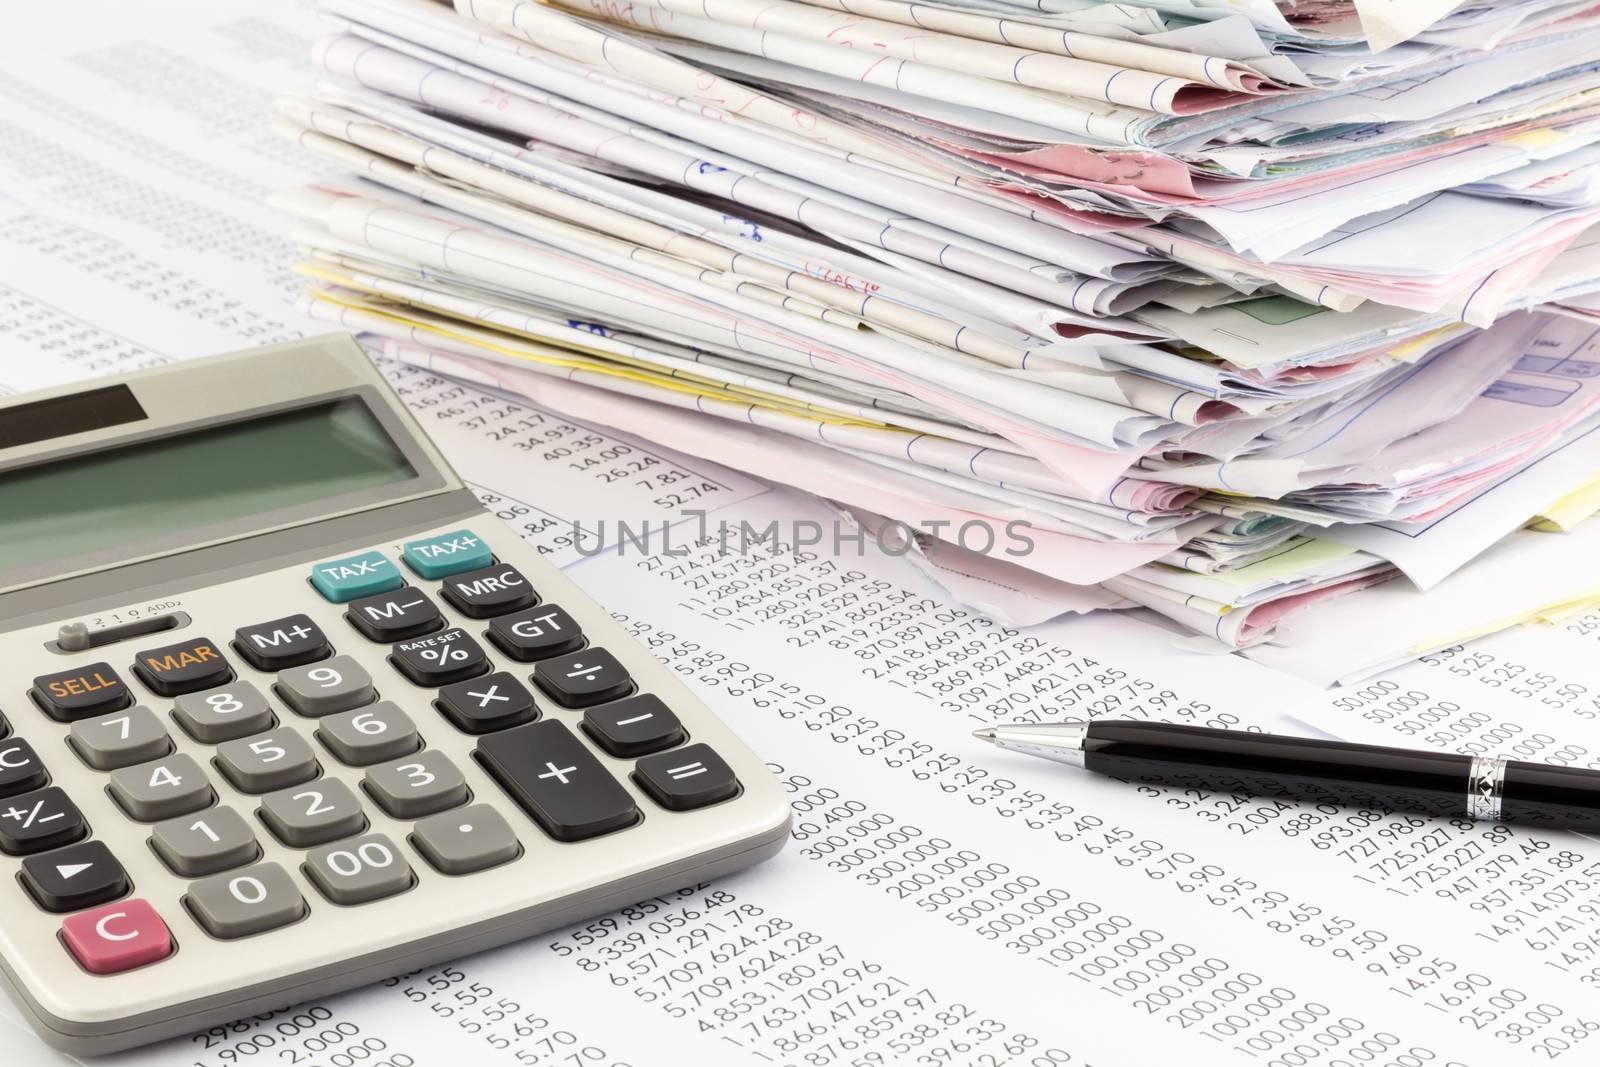 calculator and invoices on financial summary report